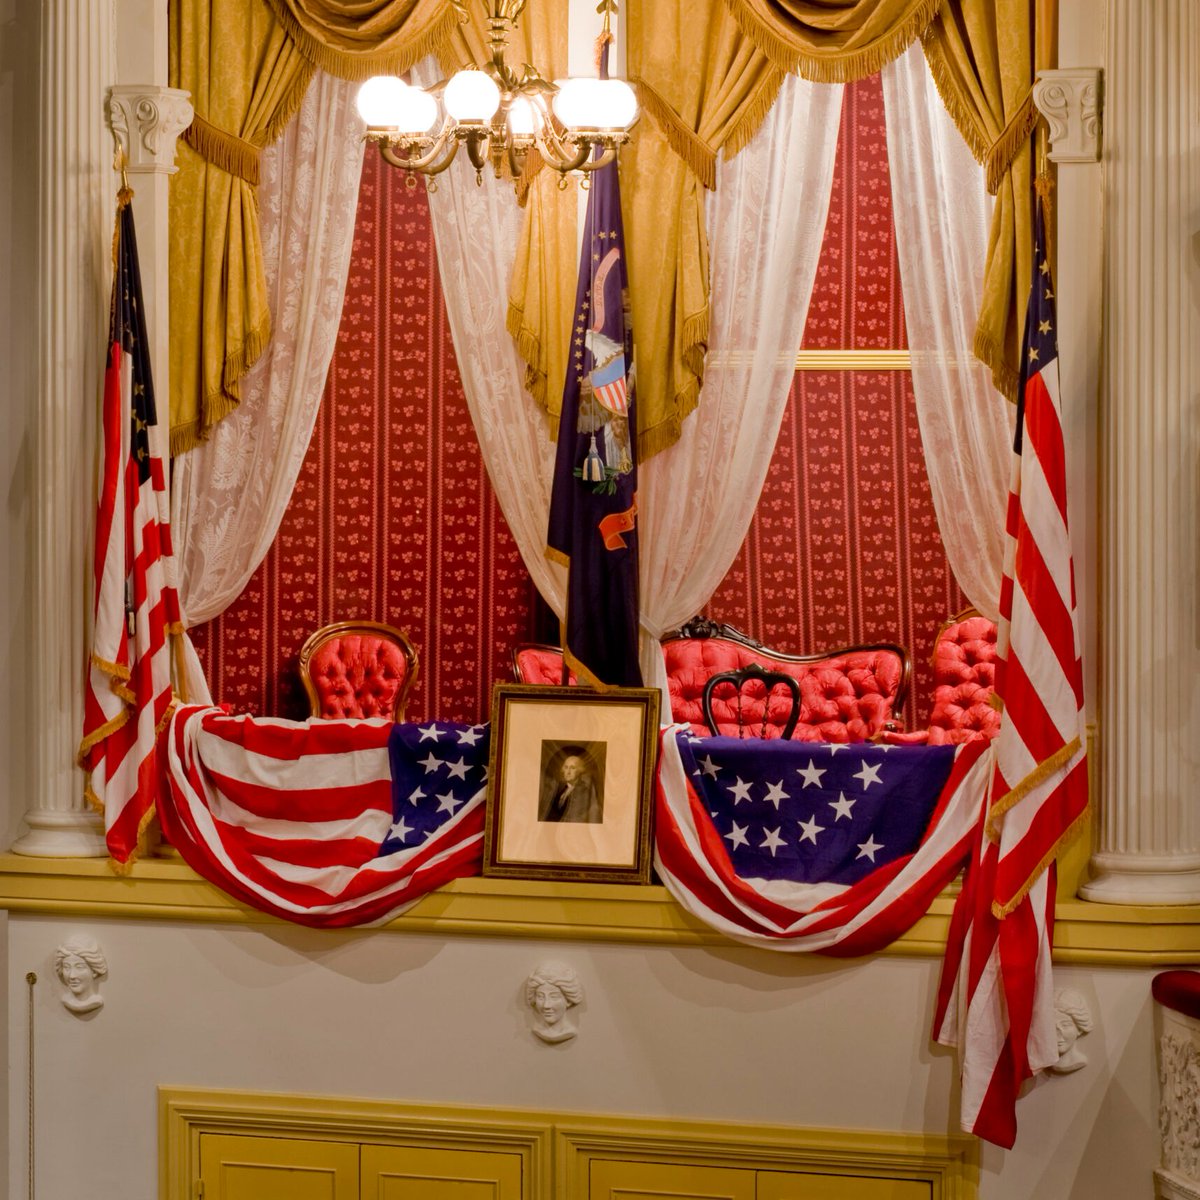 At approximately 10:15 p.m. on April 14, 1865, President Abraham Lincoln was fatally shot in Ford's Theatre by a Confederate sympathizer and white supremacist, John Wilkes Booth. Learn more about this fateful night with these FAQs by @FordsTheatreNPS. nps.gov/foth/faqs.htm